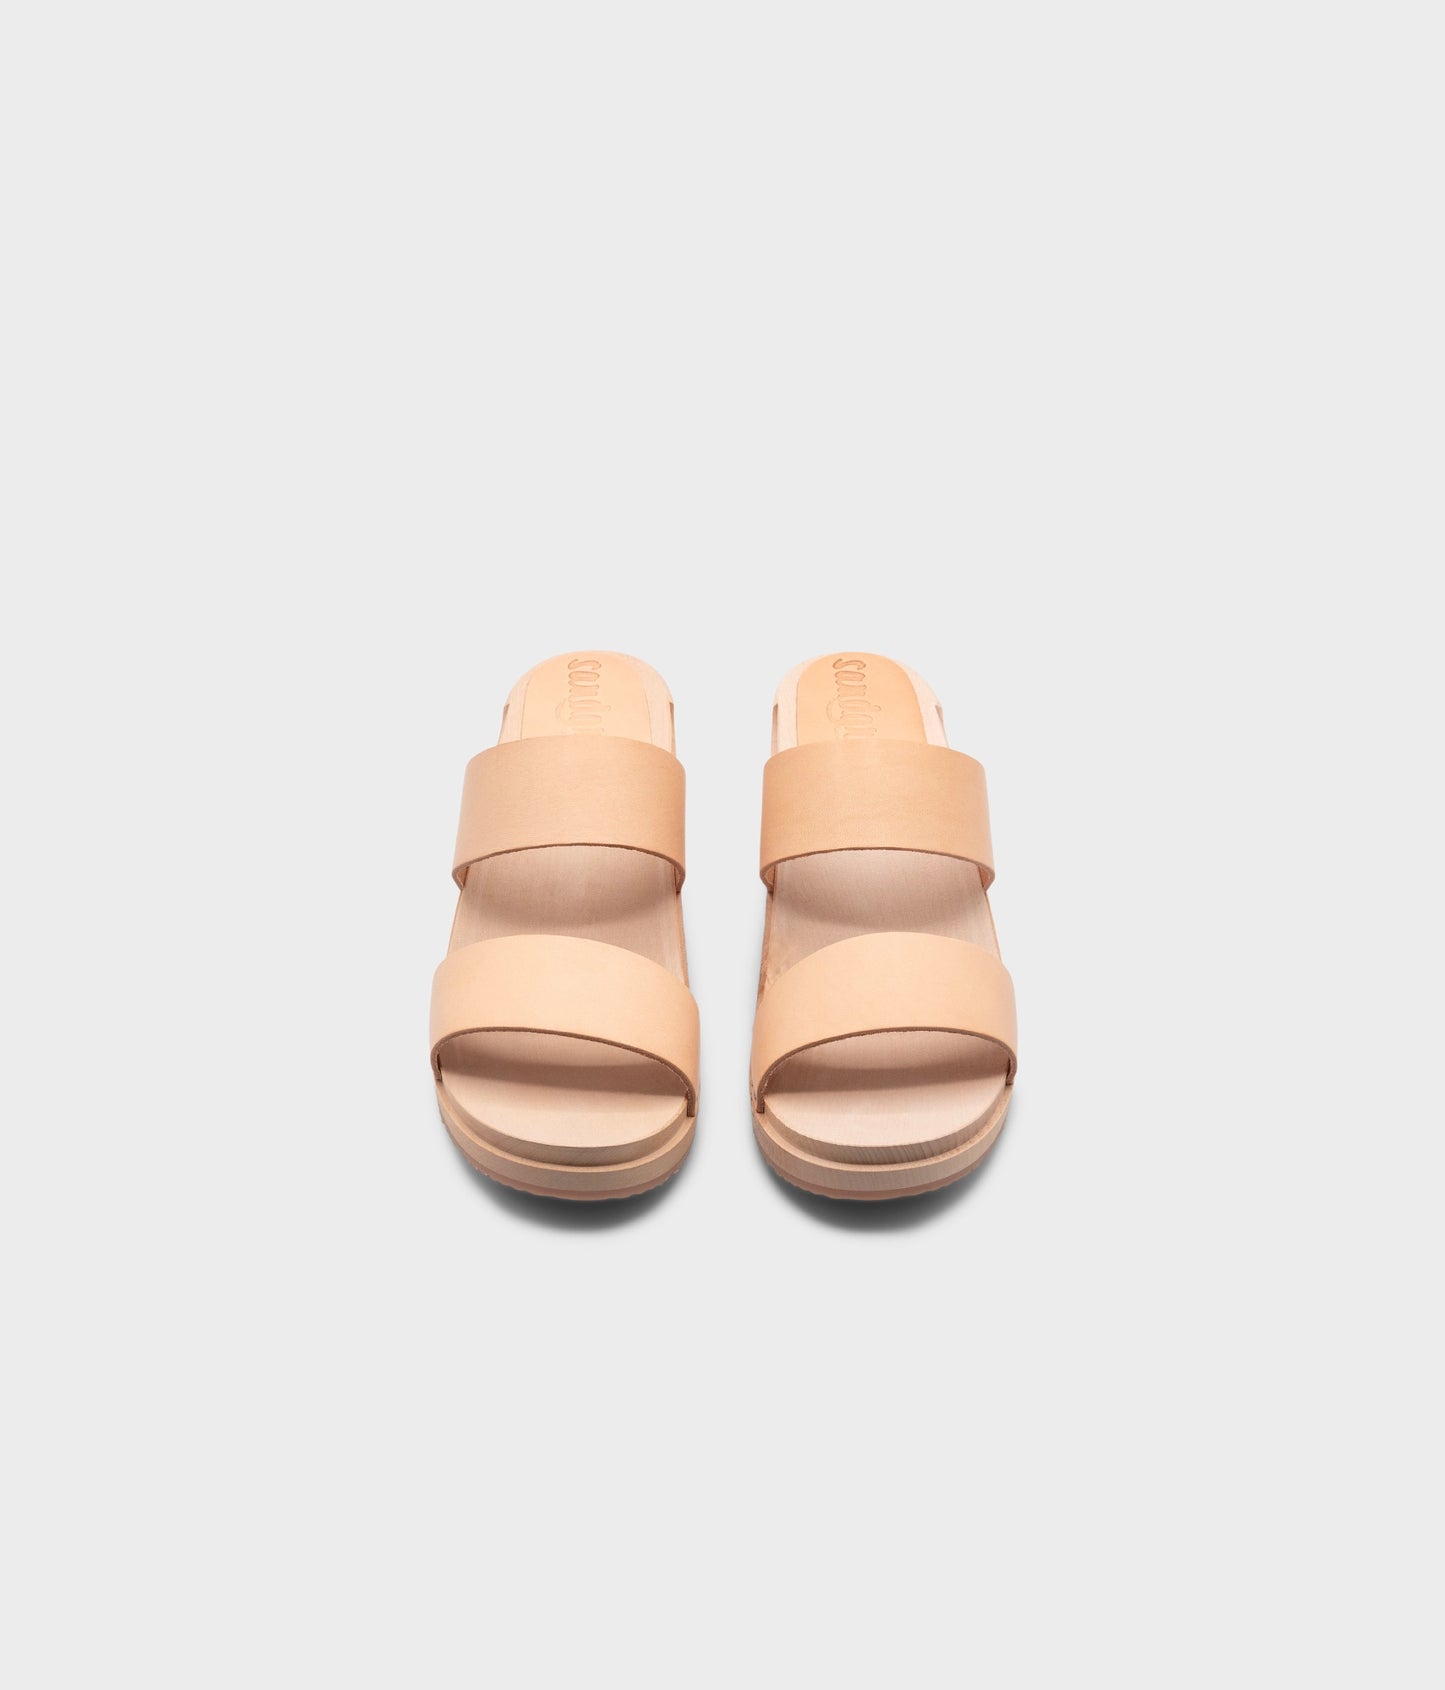 low heeled slip-in clog sandal with open toe in beige ecru vegetable tanned leather stapled on a light wooden base